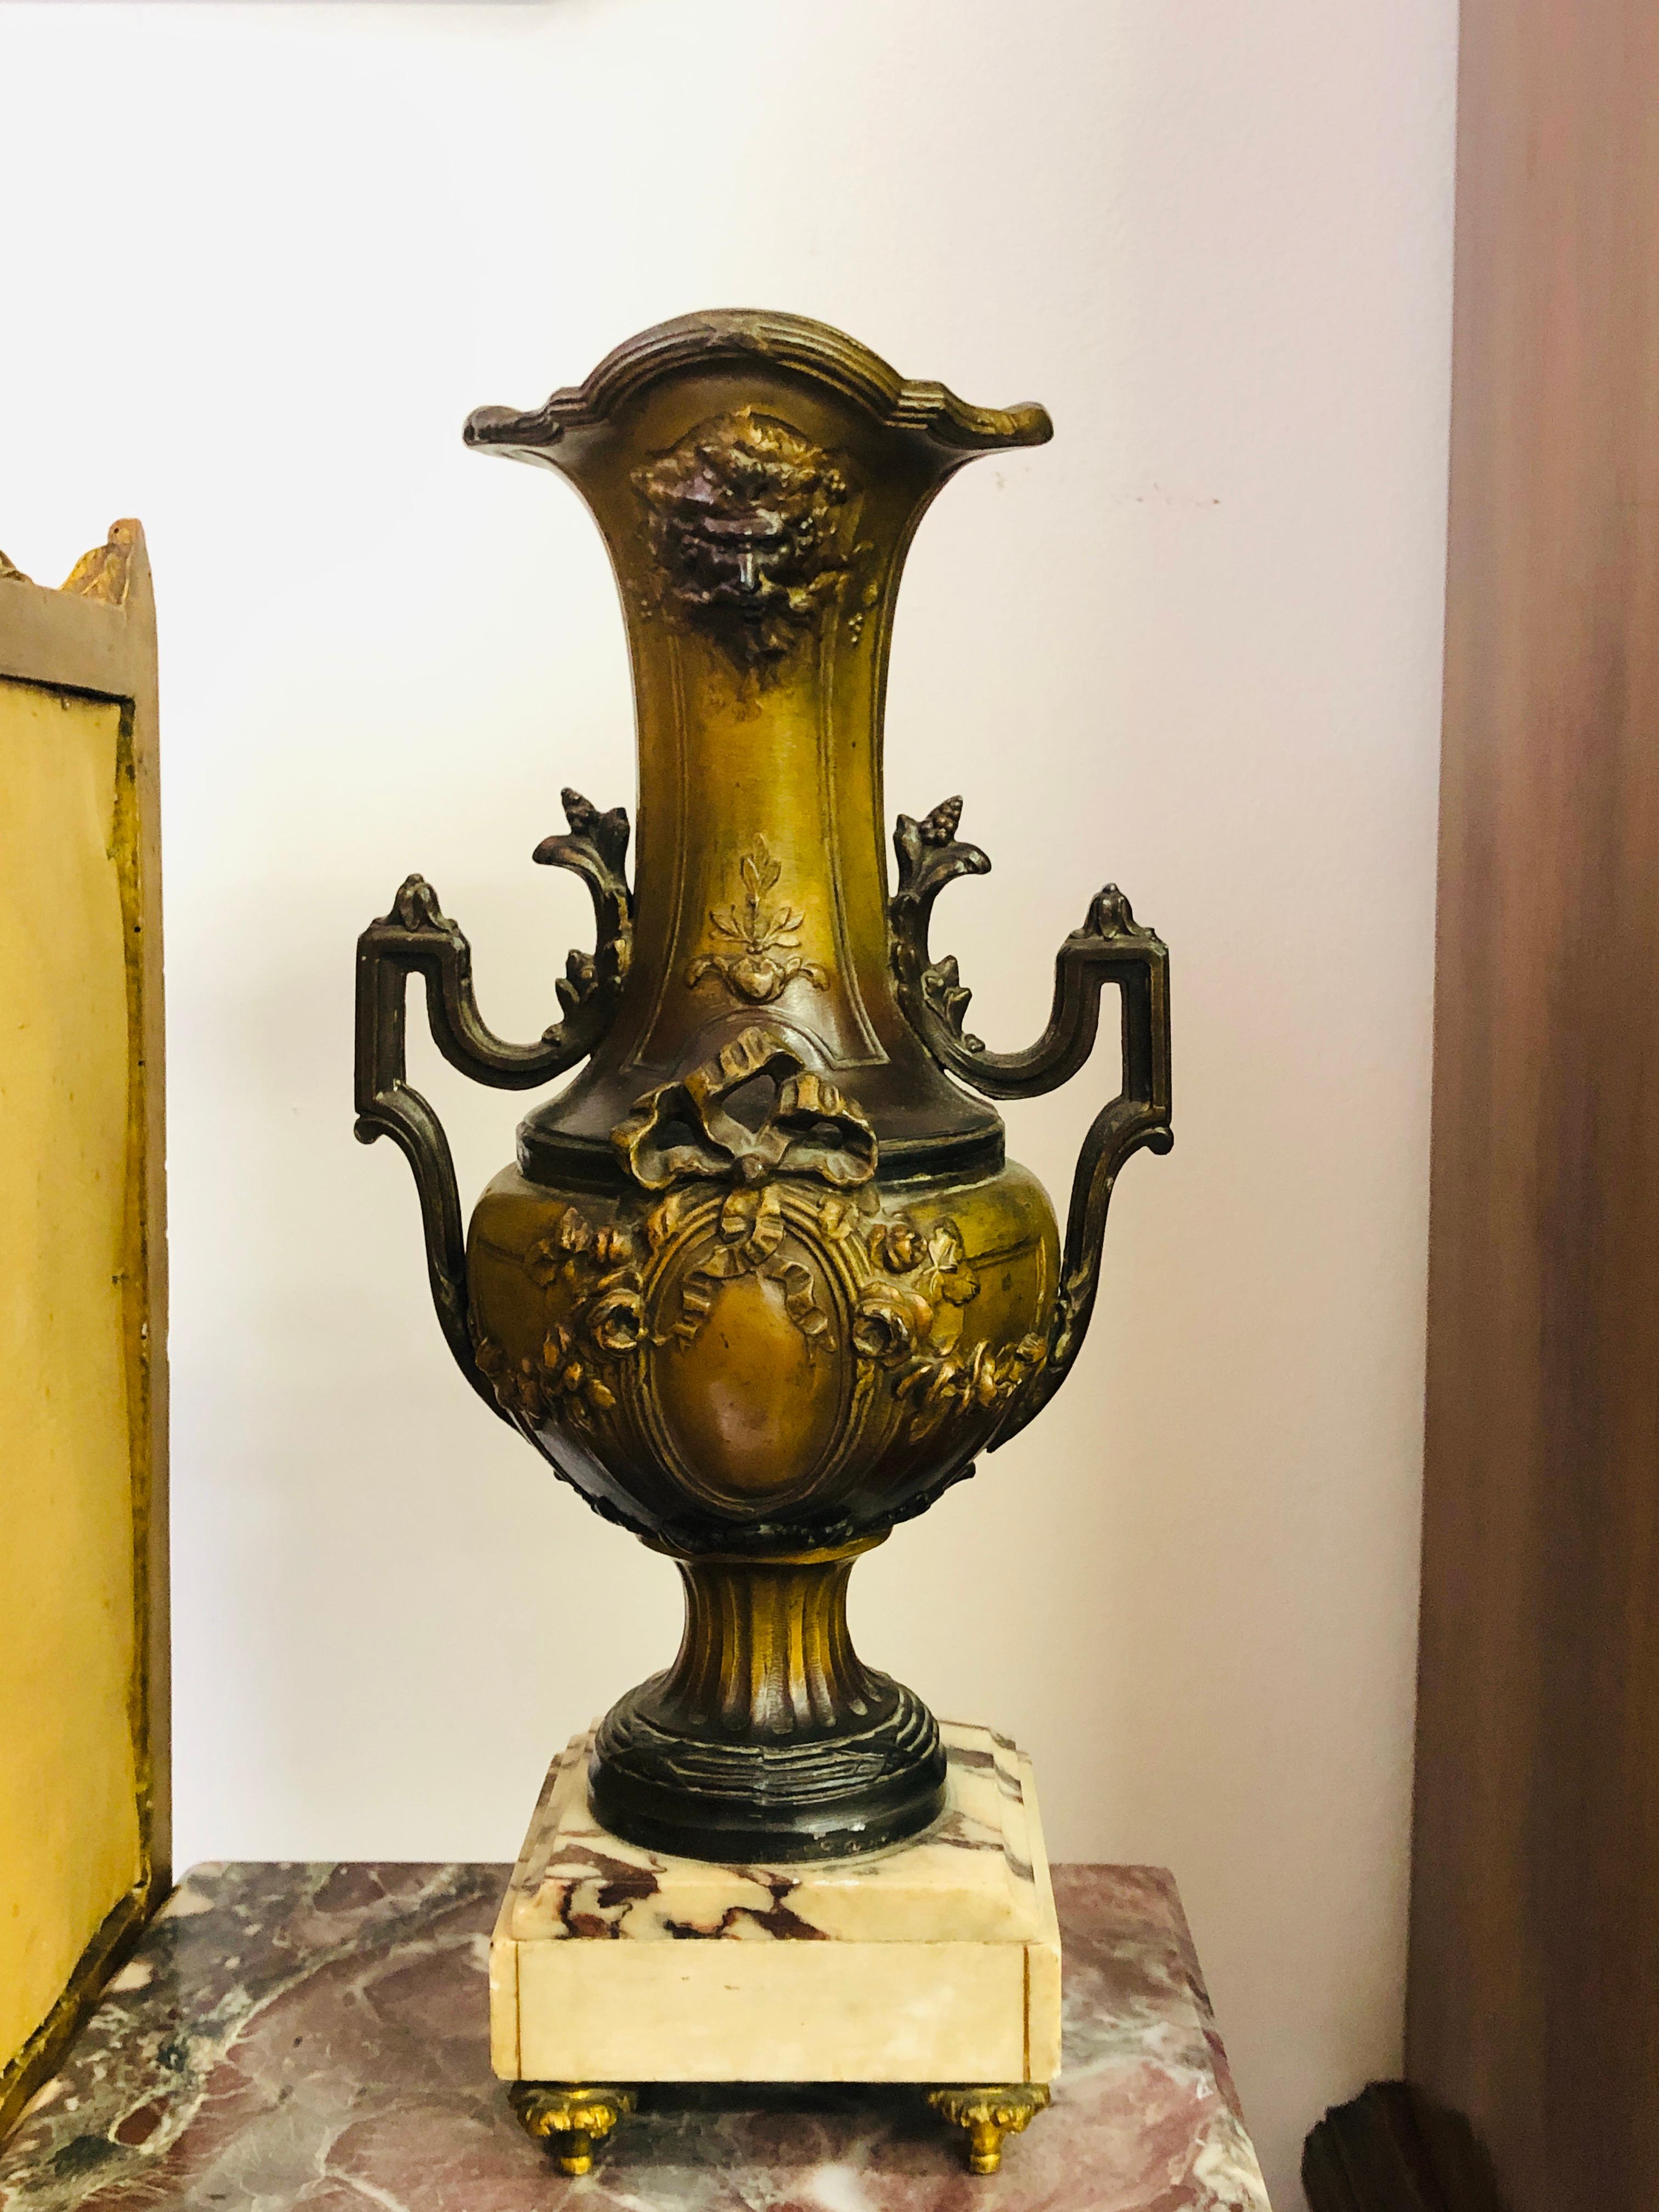 French pair of vases with brown patina, decorated in Louise XV style, standing on white marble base. Very good condition,
circa 1890.